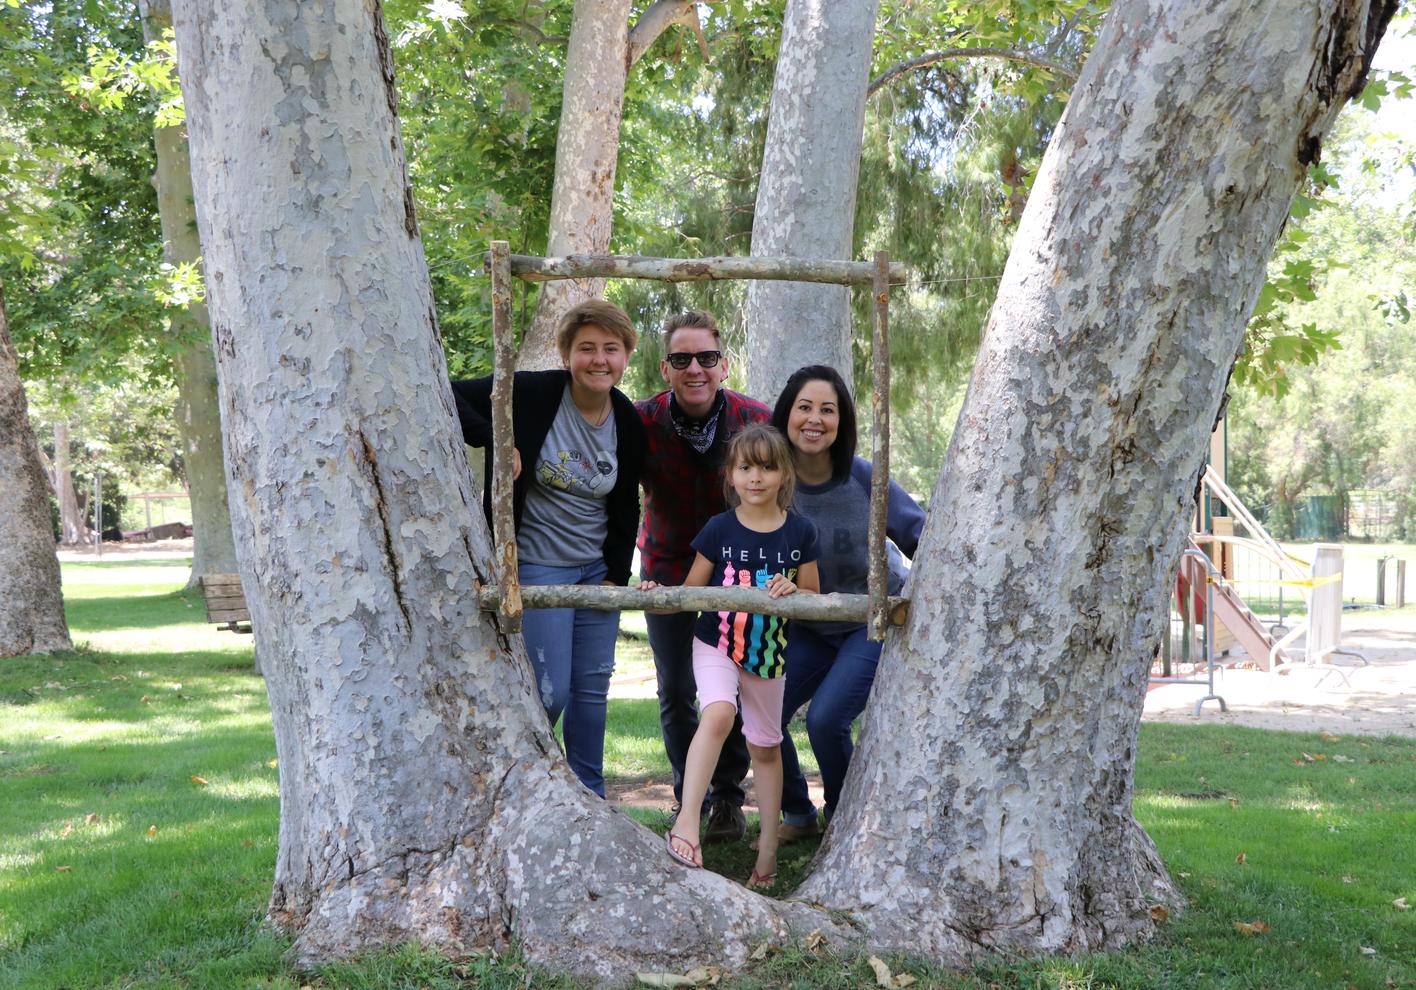 Family taking group picture outdoors at Vasa Park